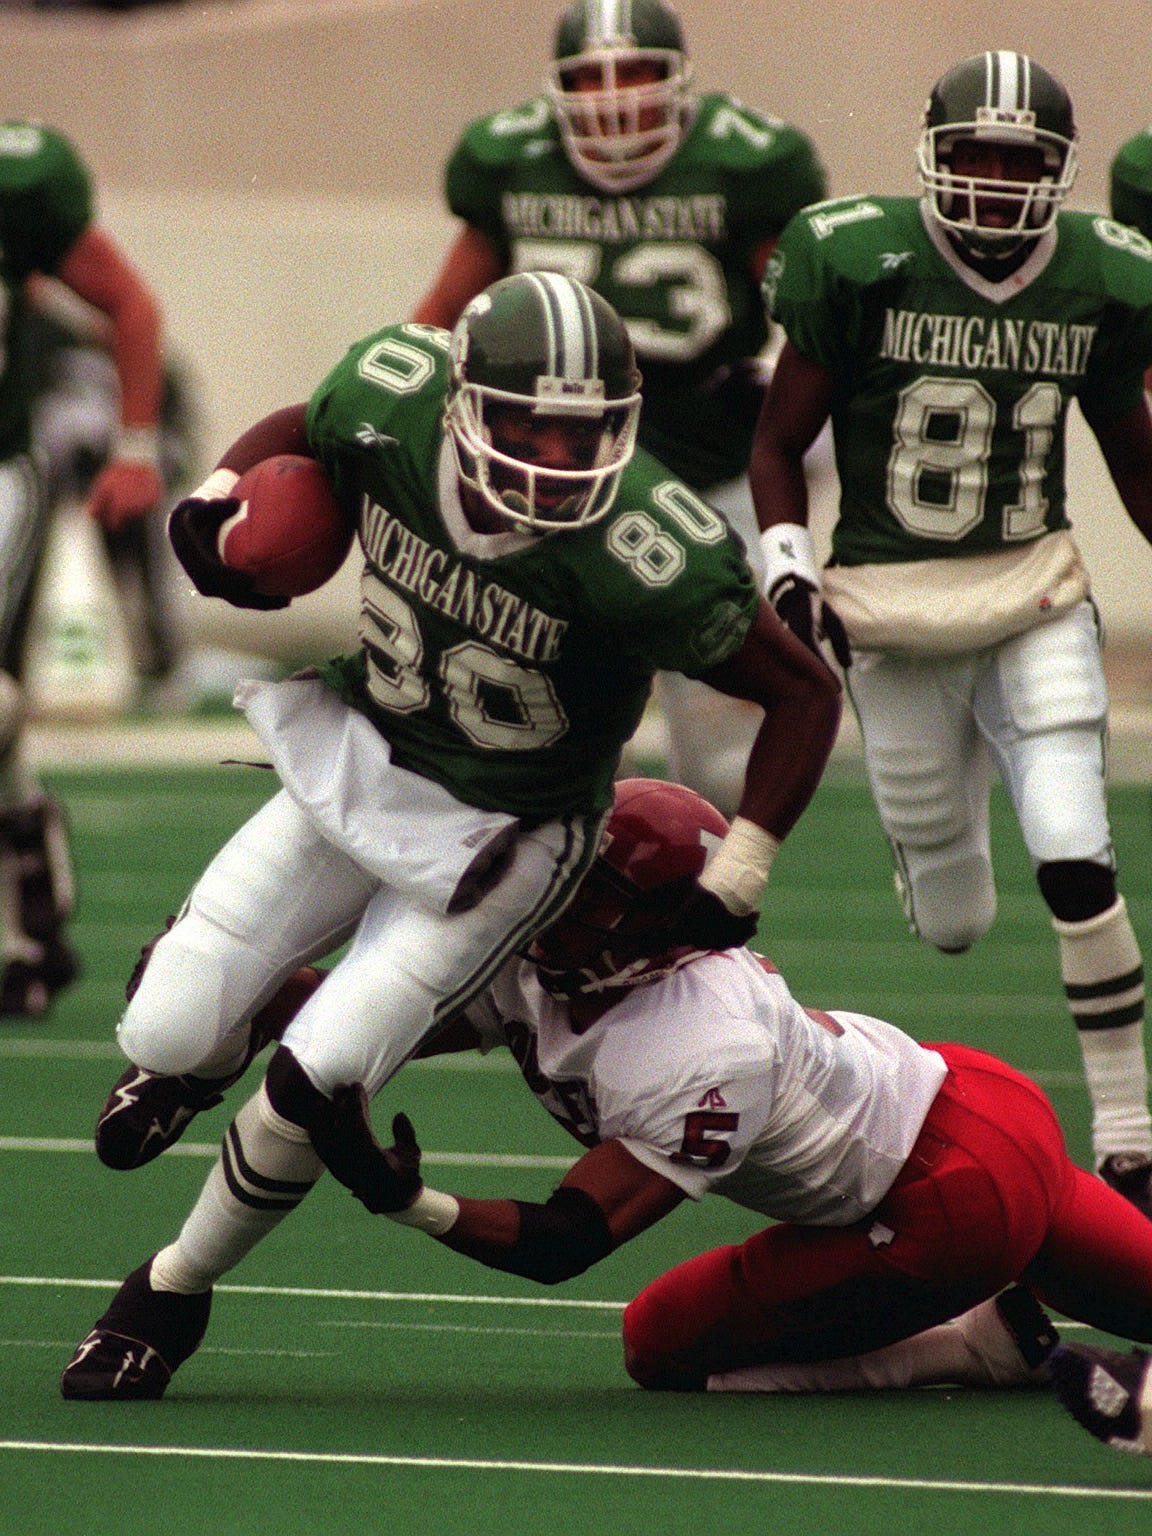 Who wore it best' at Michigan State: No. 80